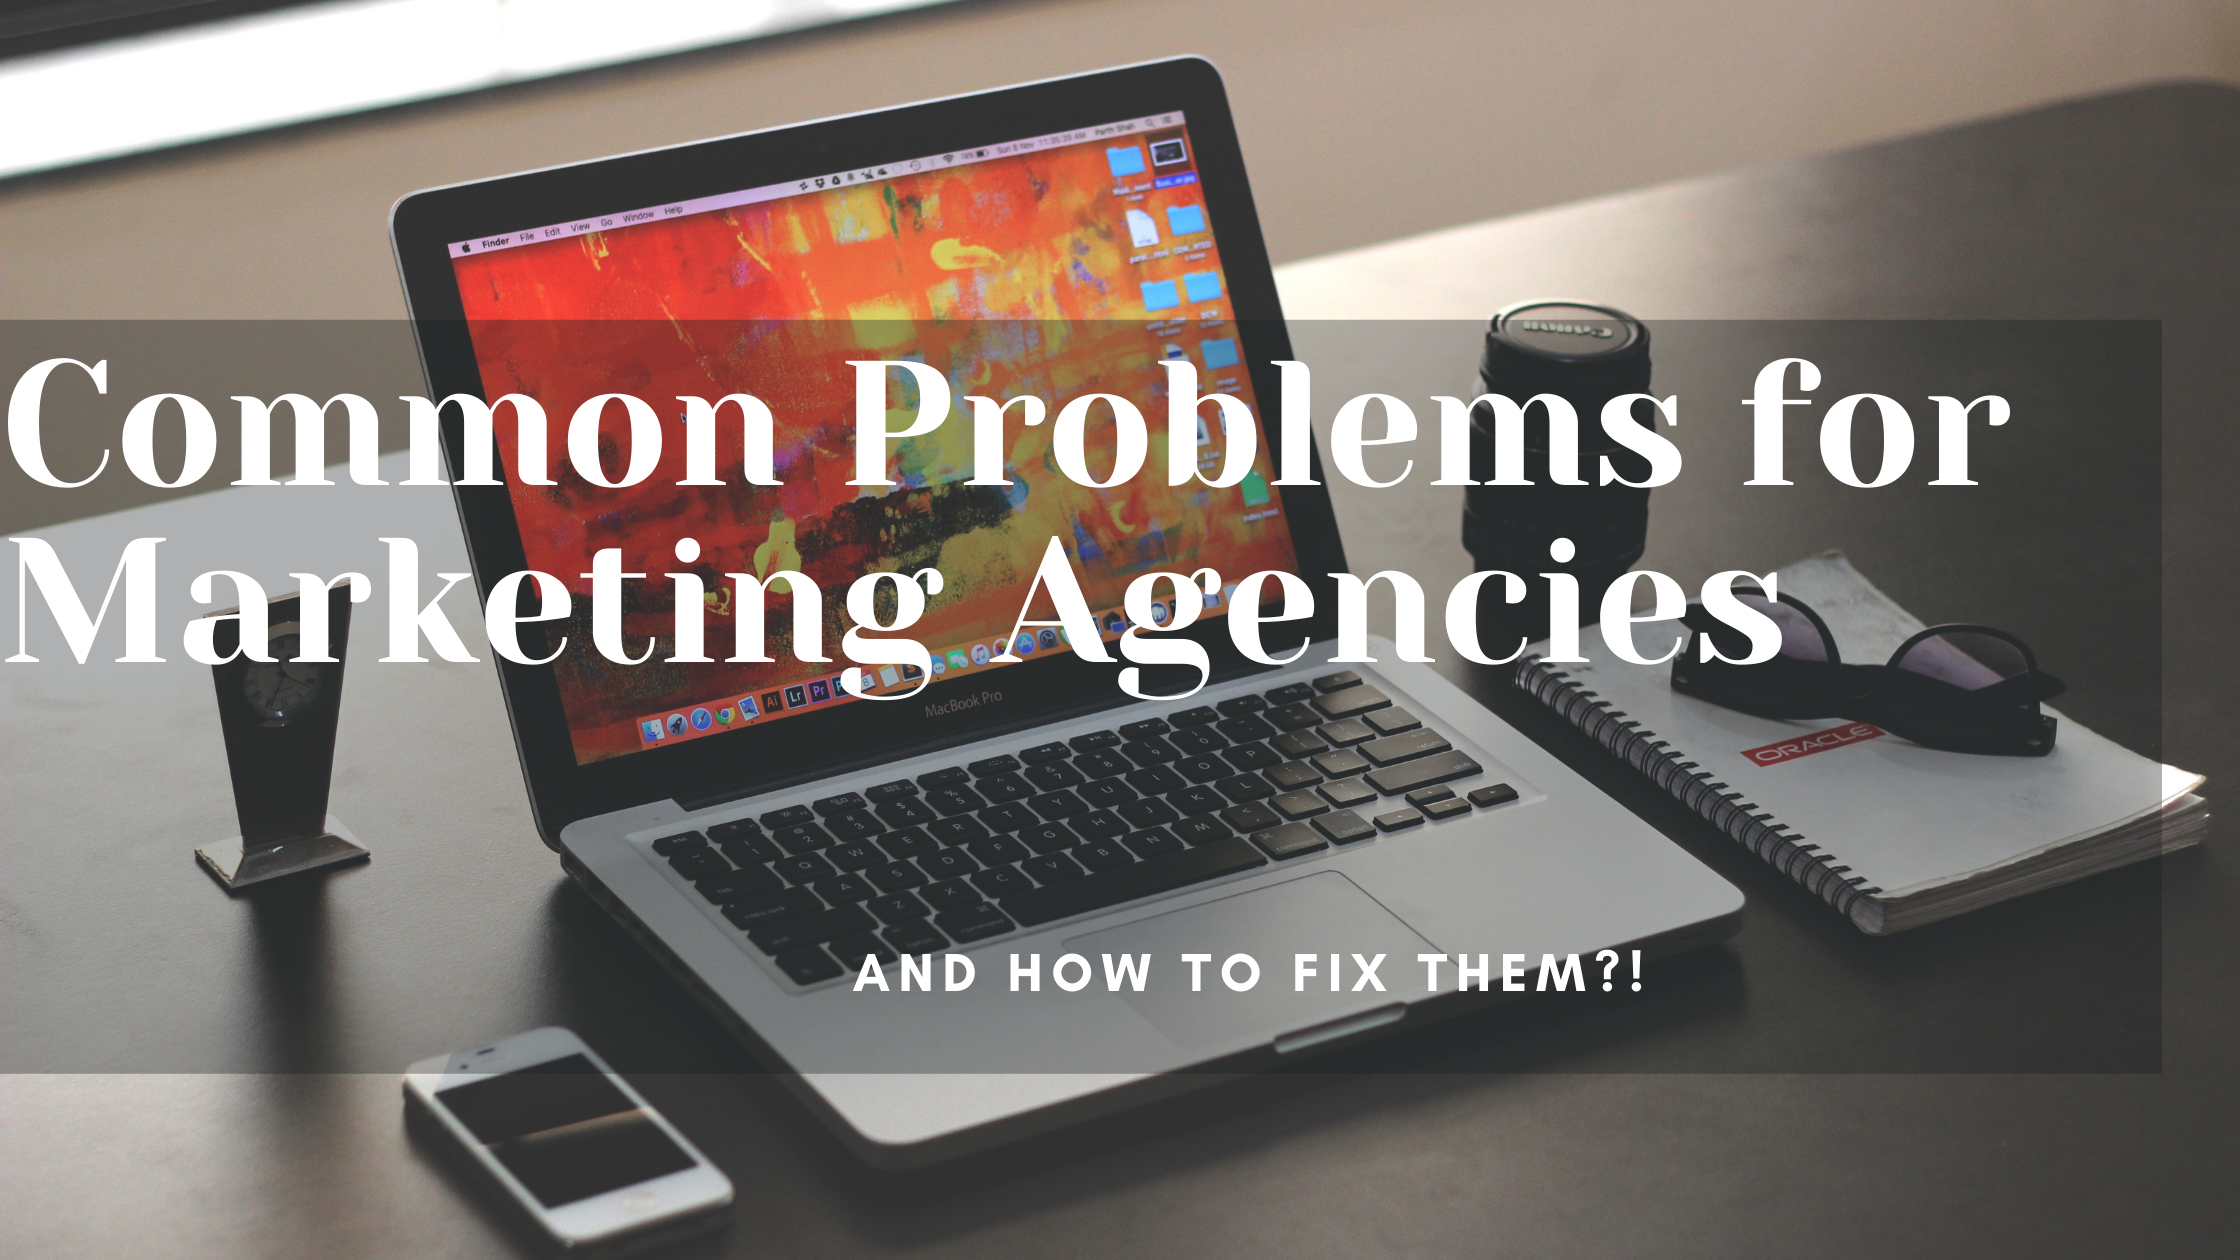 Common Problems for Marketing Agencies and How to Fix Them